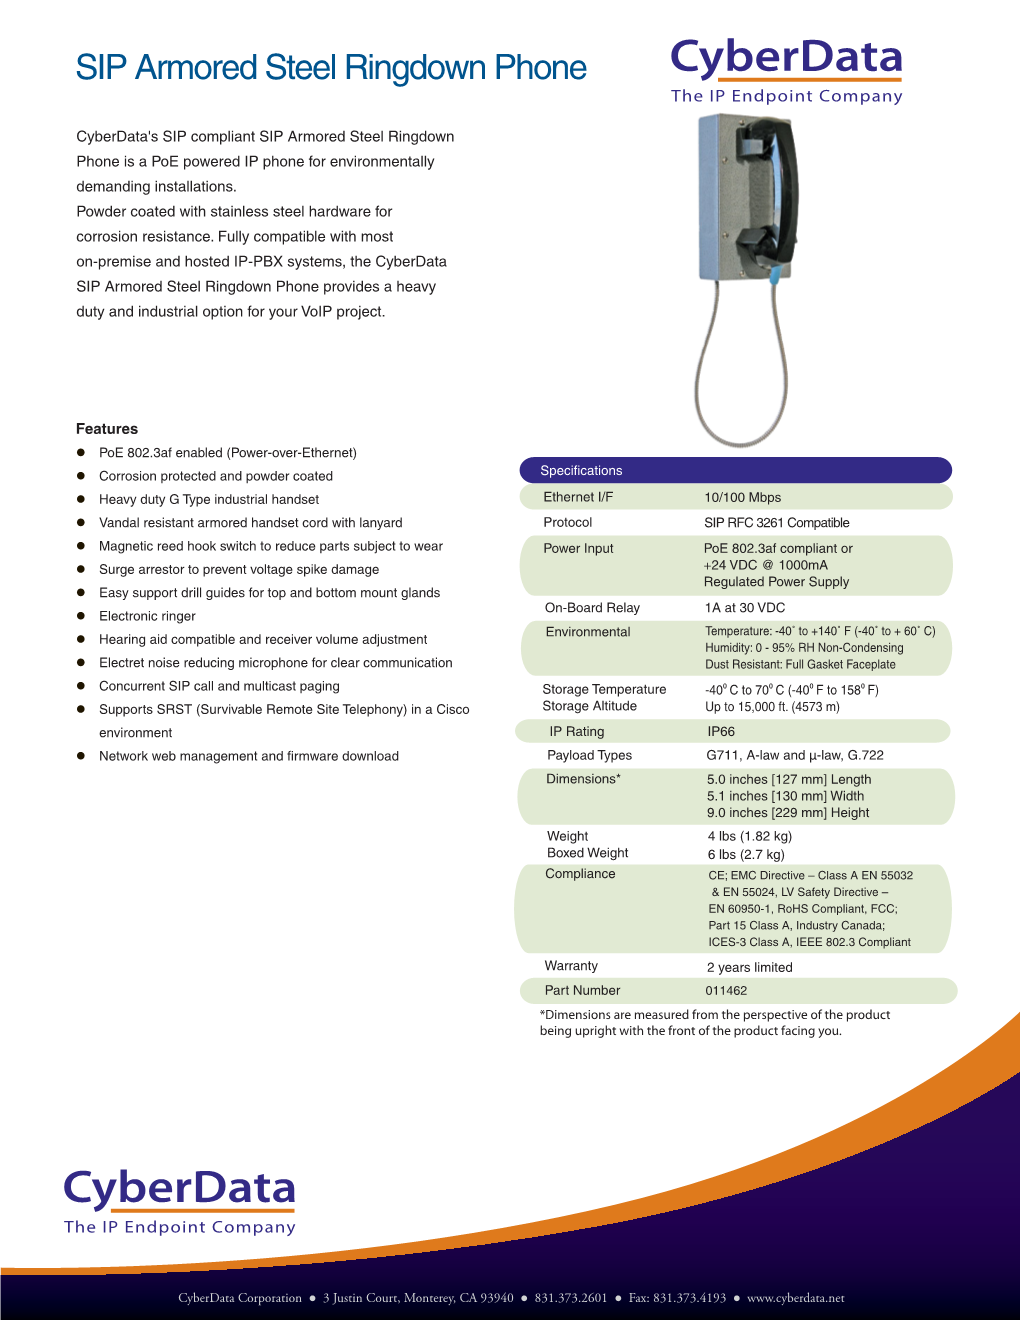 SIP Armored Steel Ringdown Phone the IP Endpoint Company